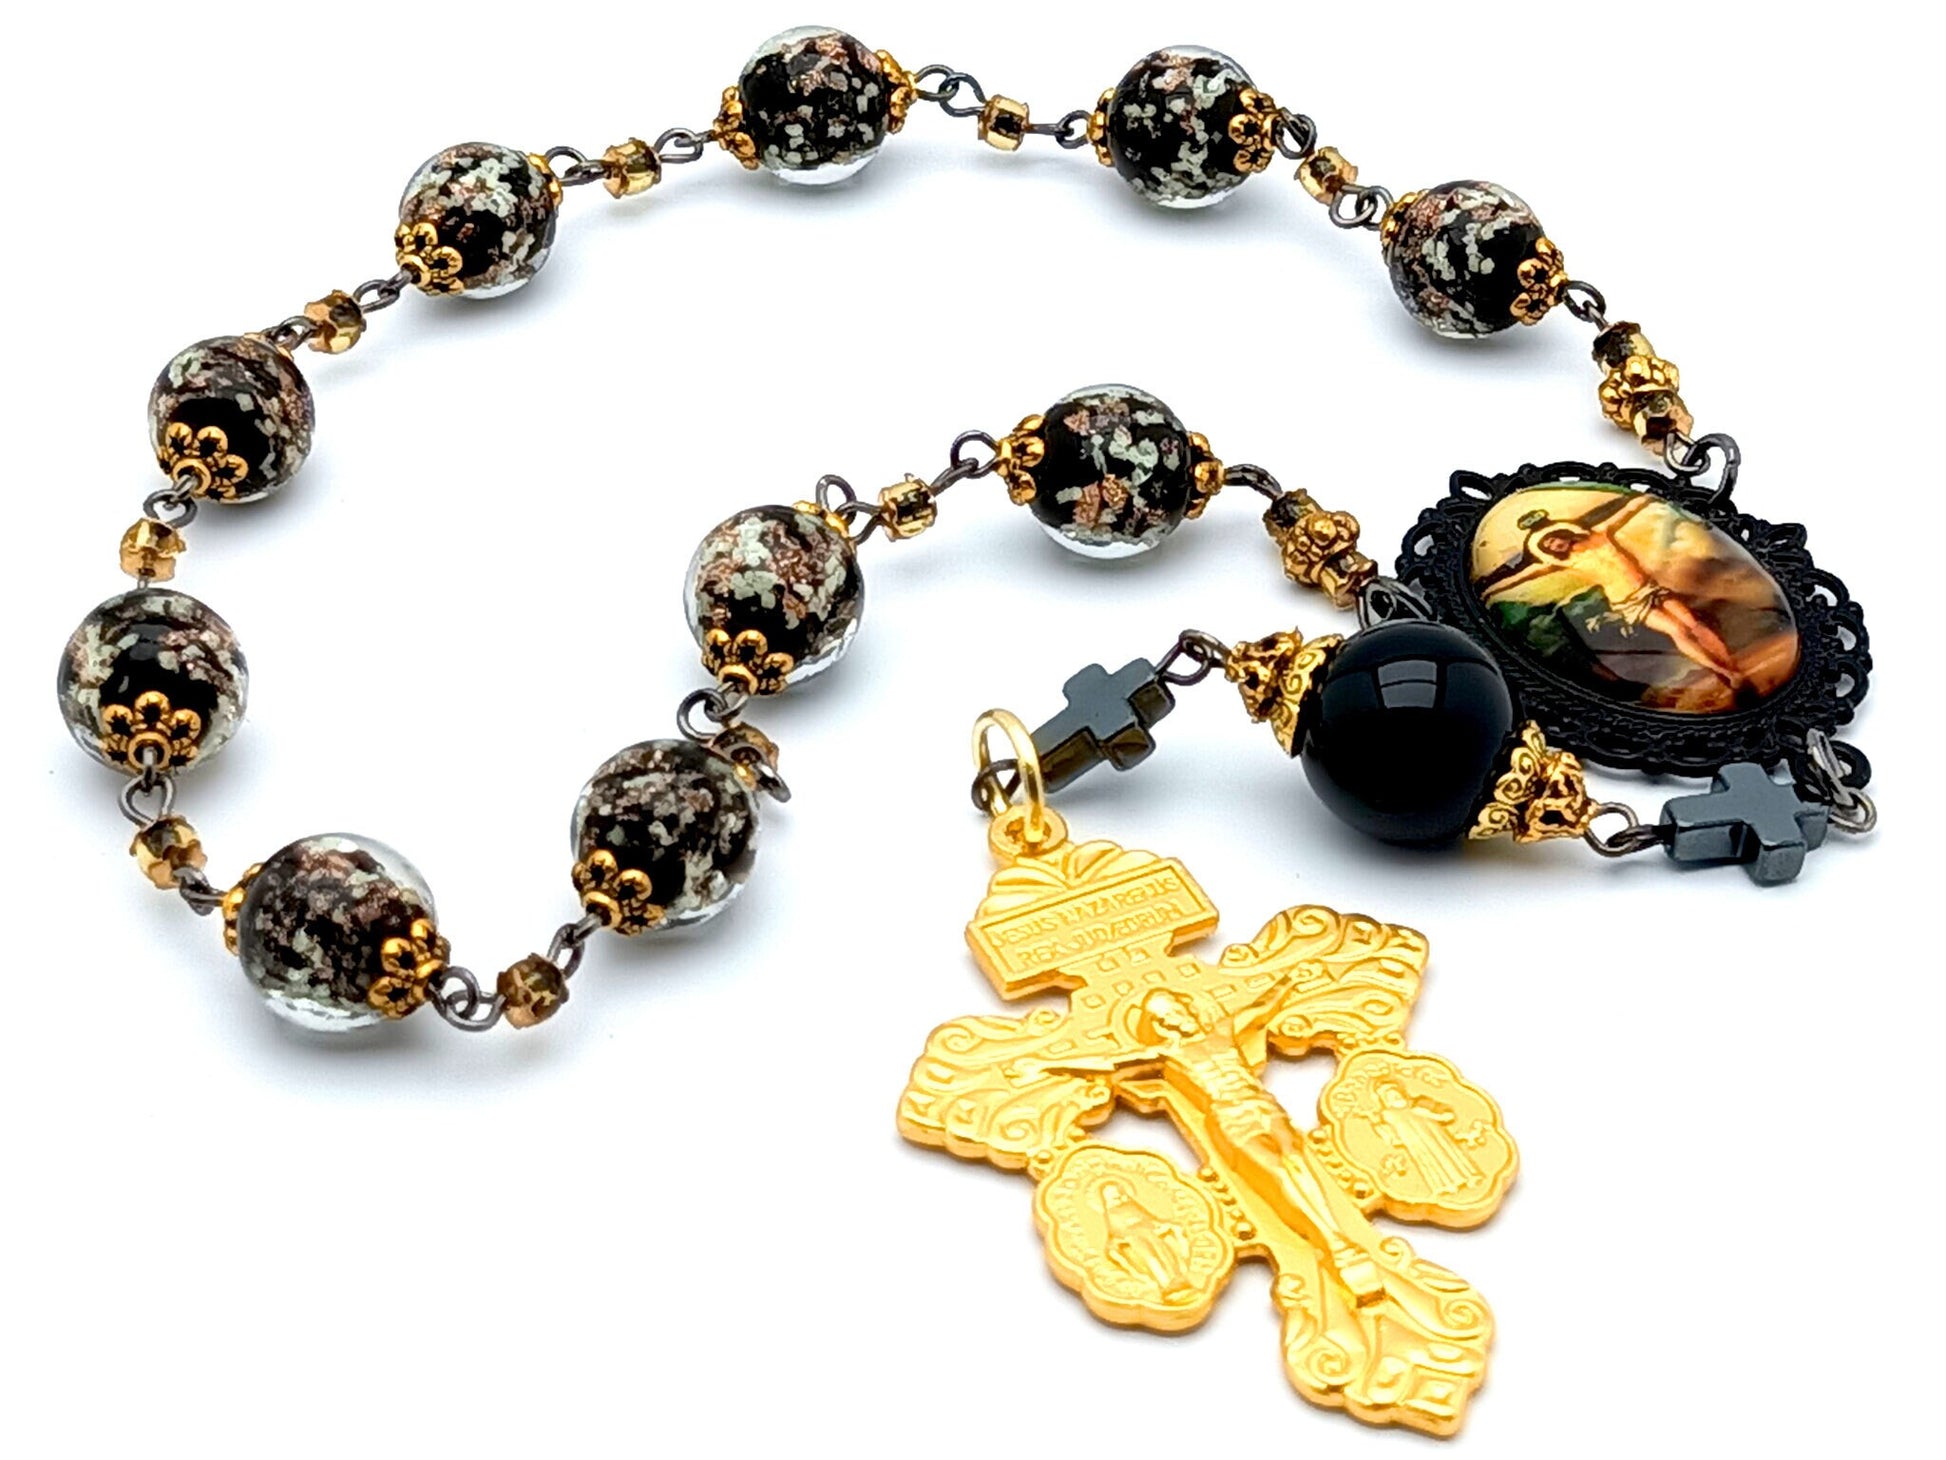 Crucifixion unique rosary beads single decade rosary with black and gold glow in the dark glass beads, golden pardon crucifix and picture centre medal.